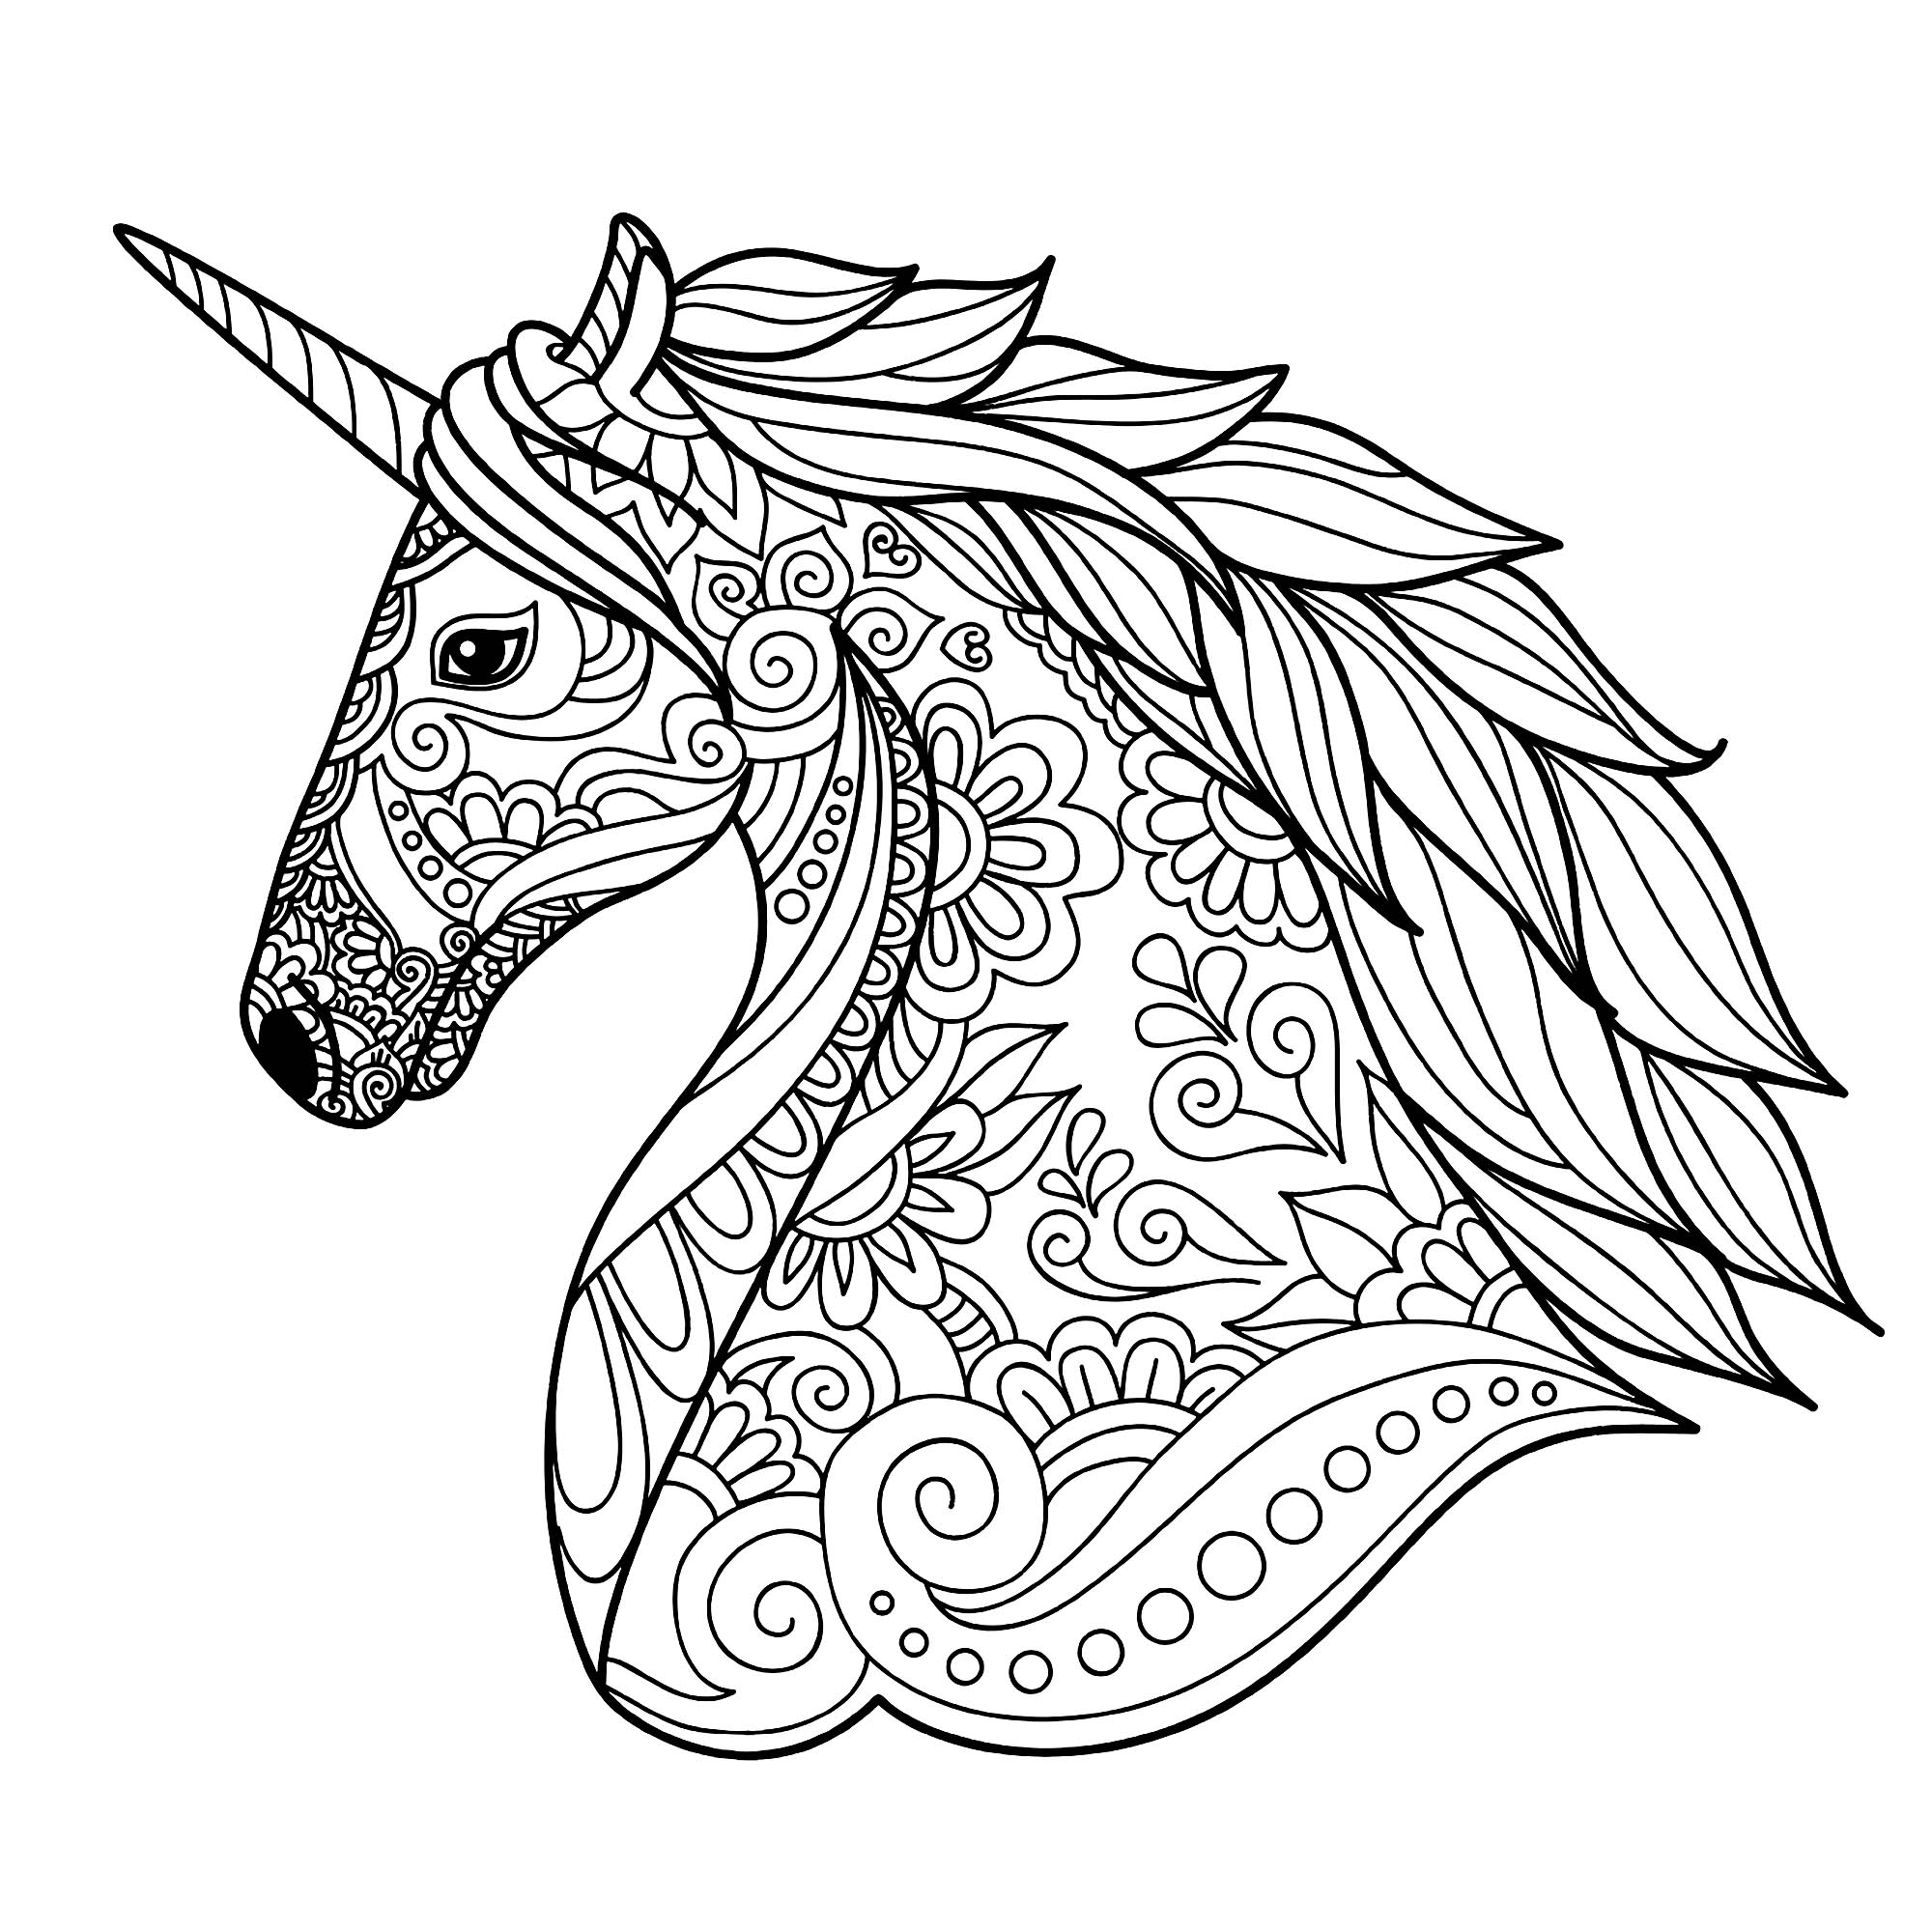 Unicorn coloring pages to print - Unicorns Kids Coloring Pages